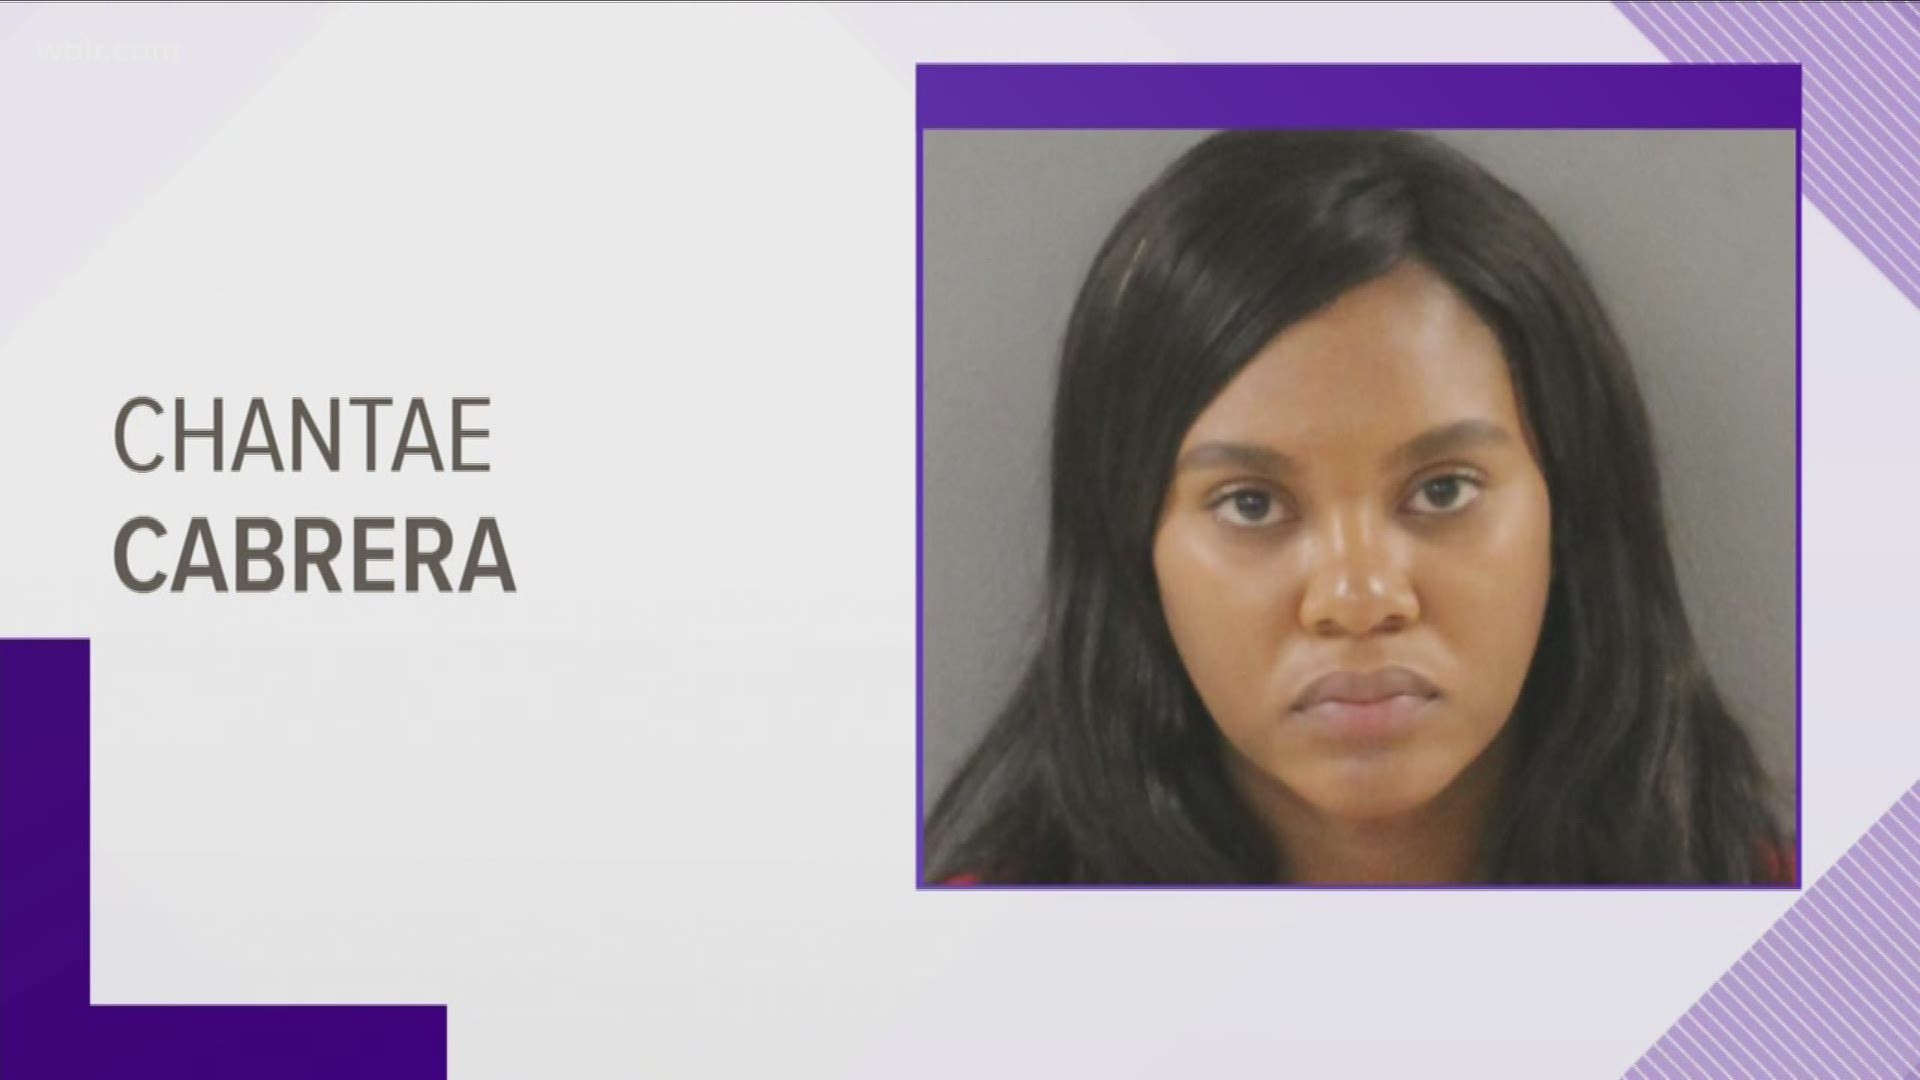 Authorities arrested 30-year-old Chantae Cabrera last week. She's charged with 1st degree murder, felony murder and aggravated child neglect.